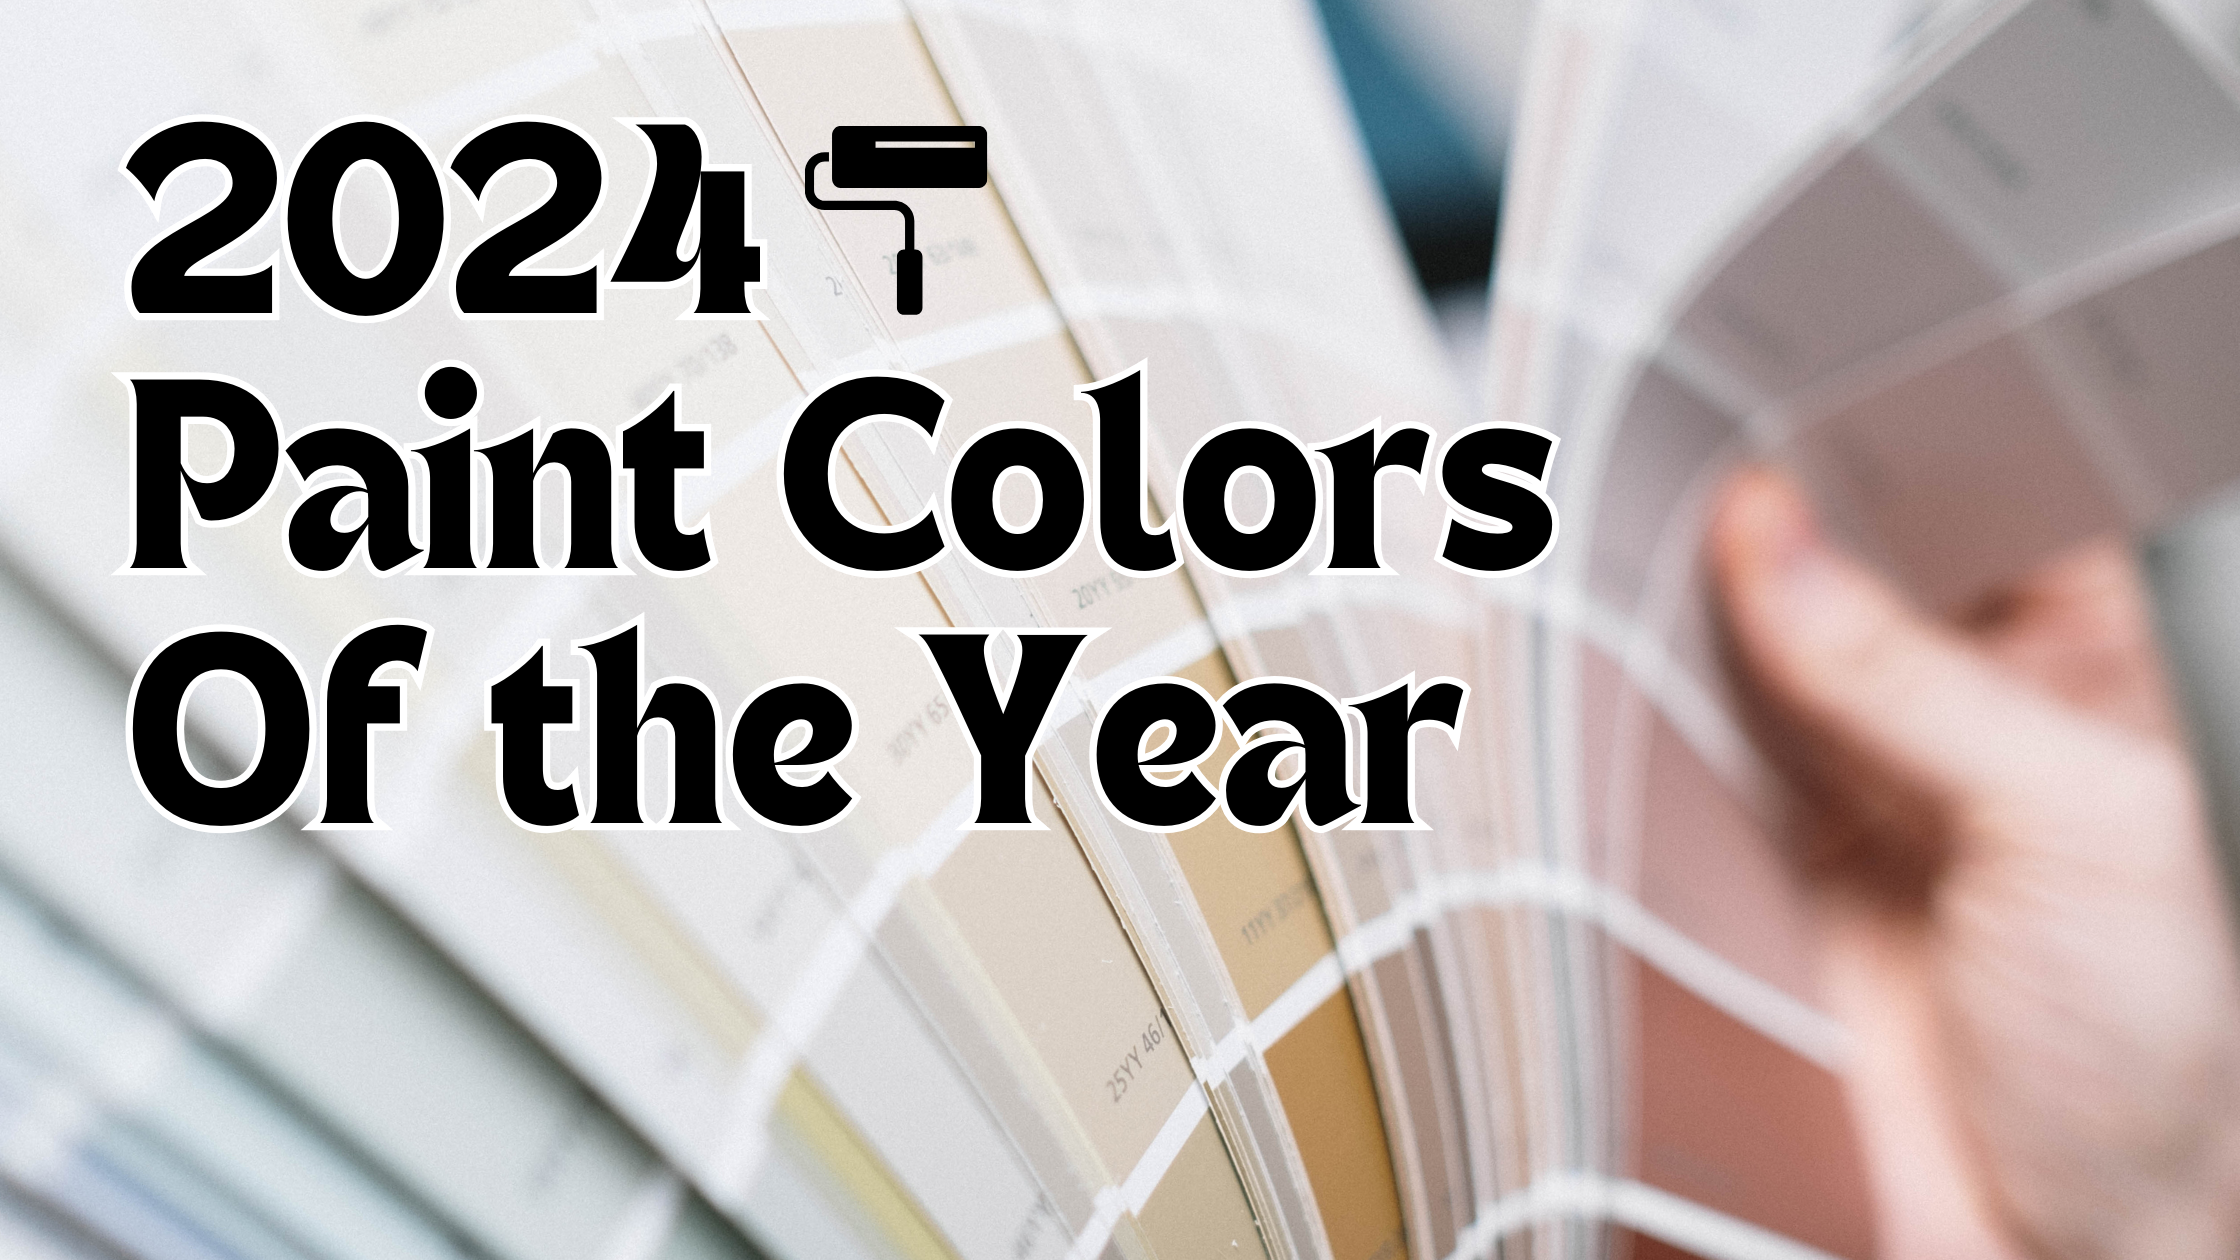 2024 Paint Colors of the Year